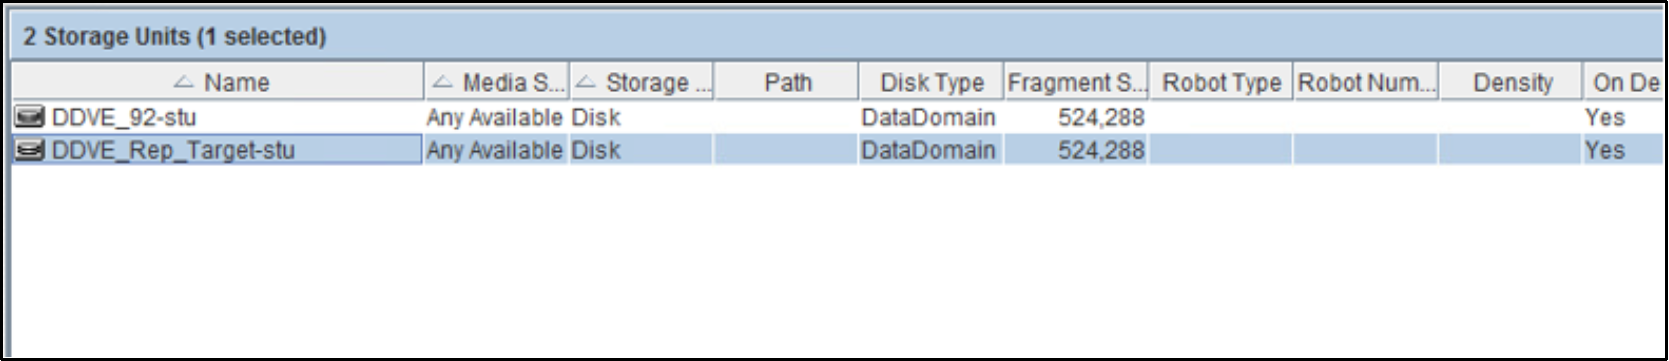 The image shows the successful storage unit creation on the destination NetBackup primary server